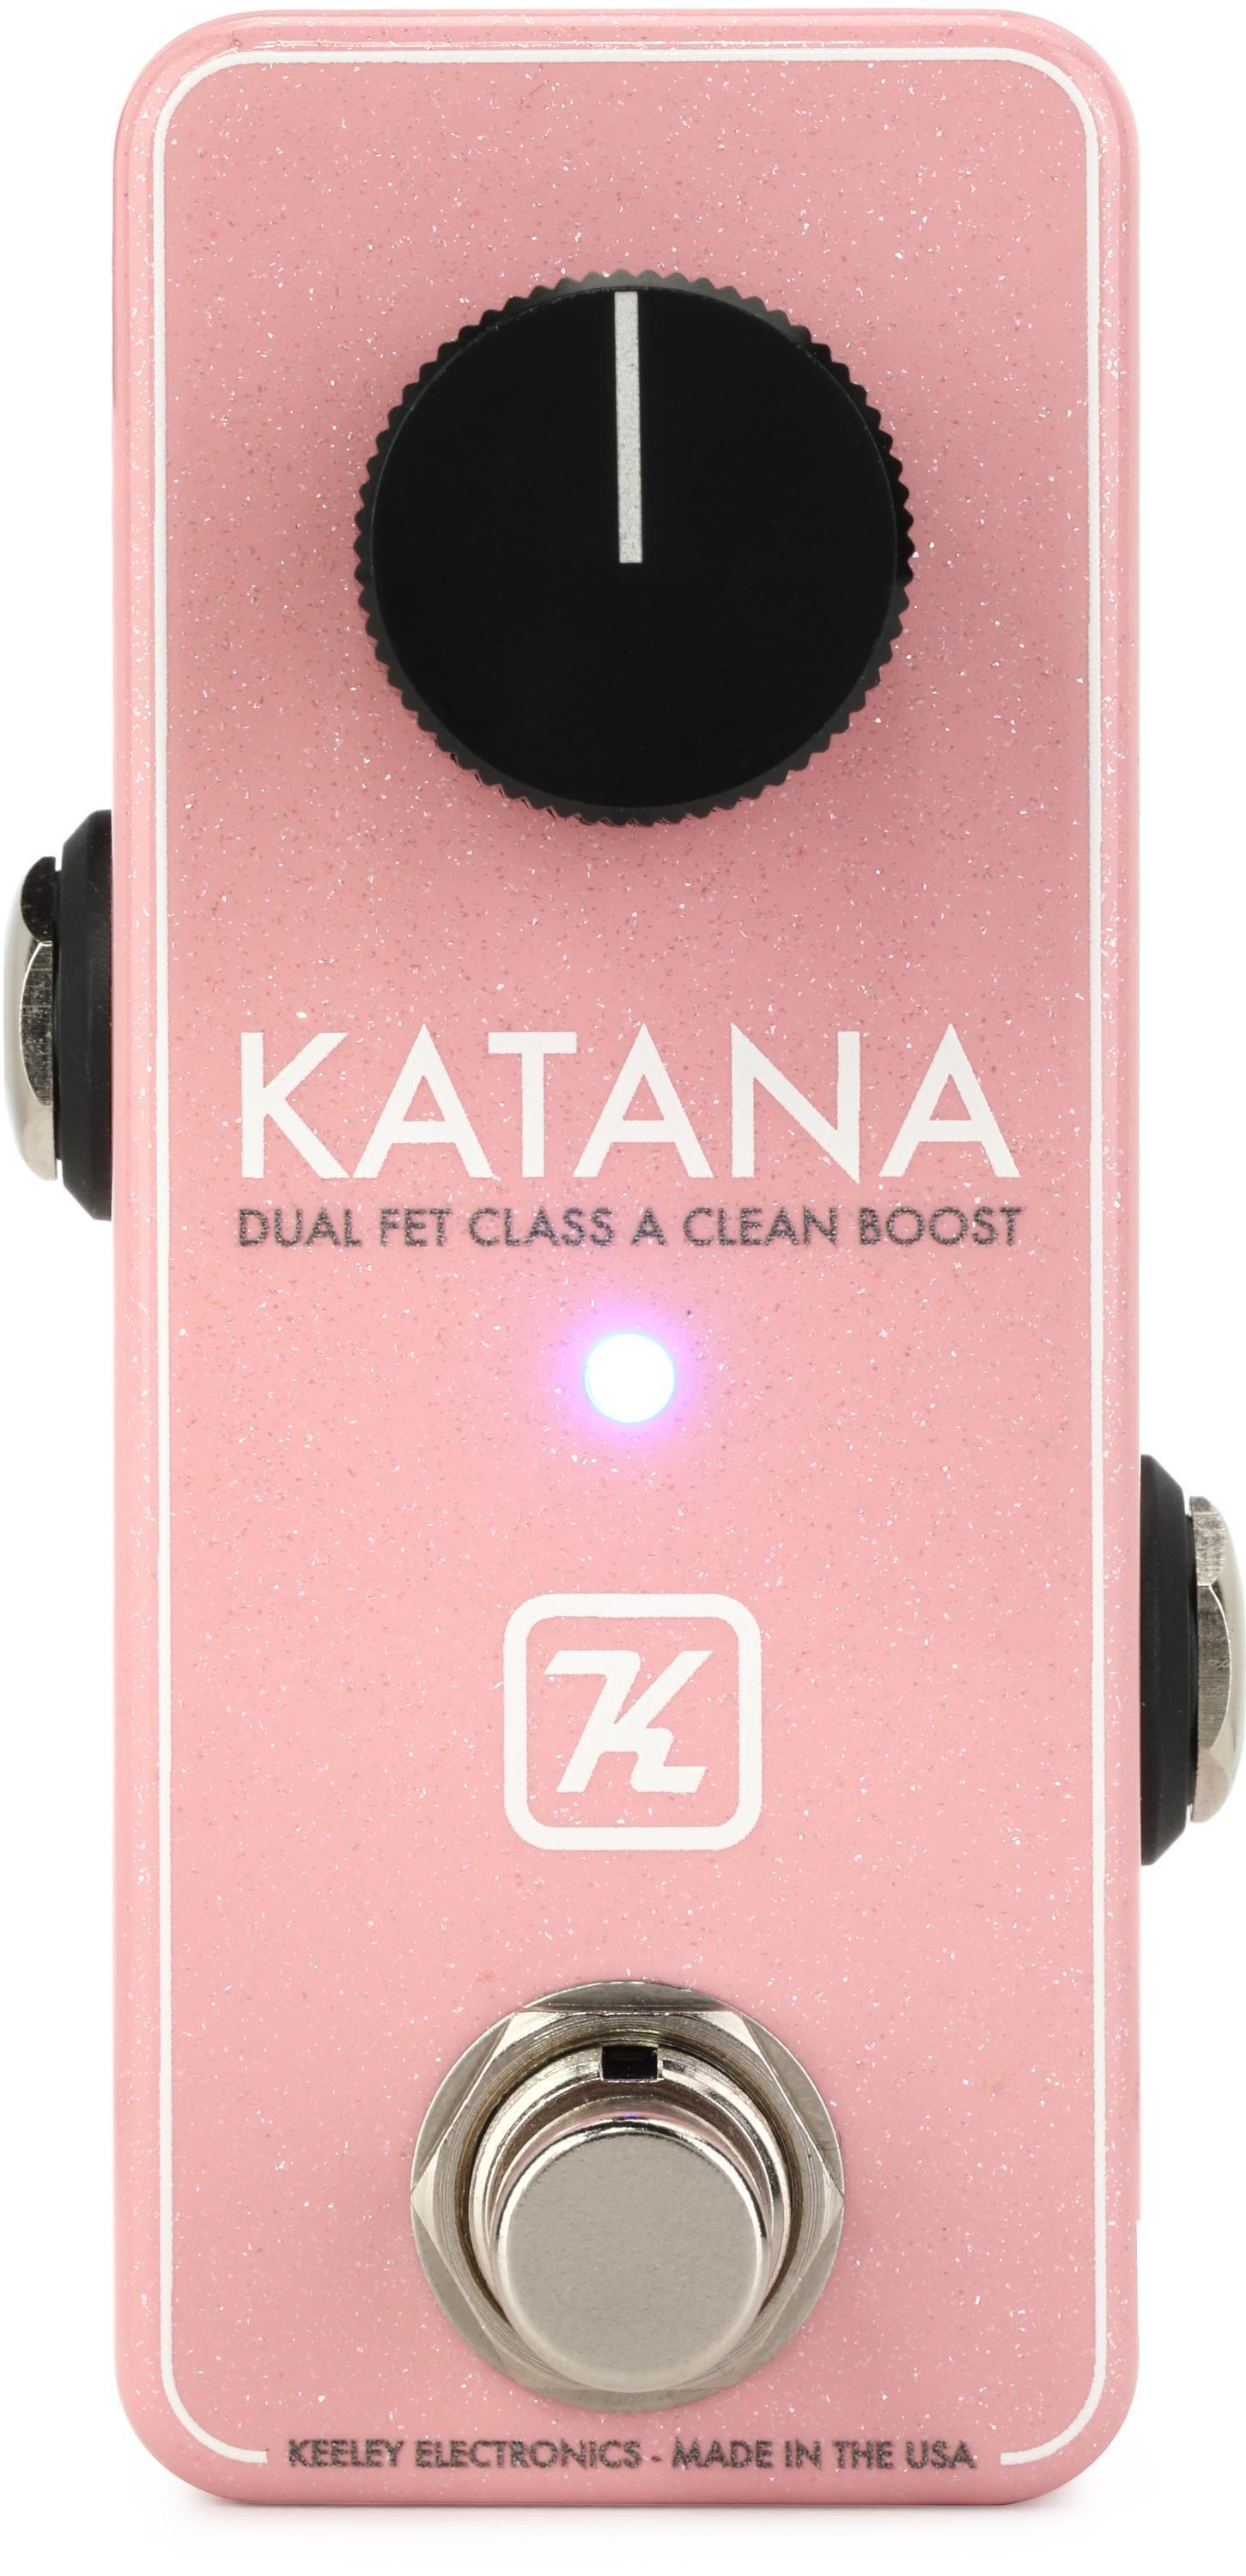 Bundled Item: Keeley Mini Katana Clean Boost Pedal - New Light Pink, Sweetwater Exclusive